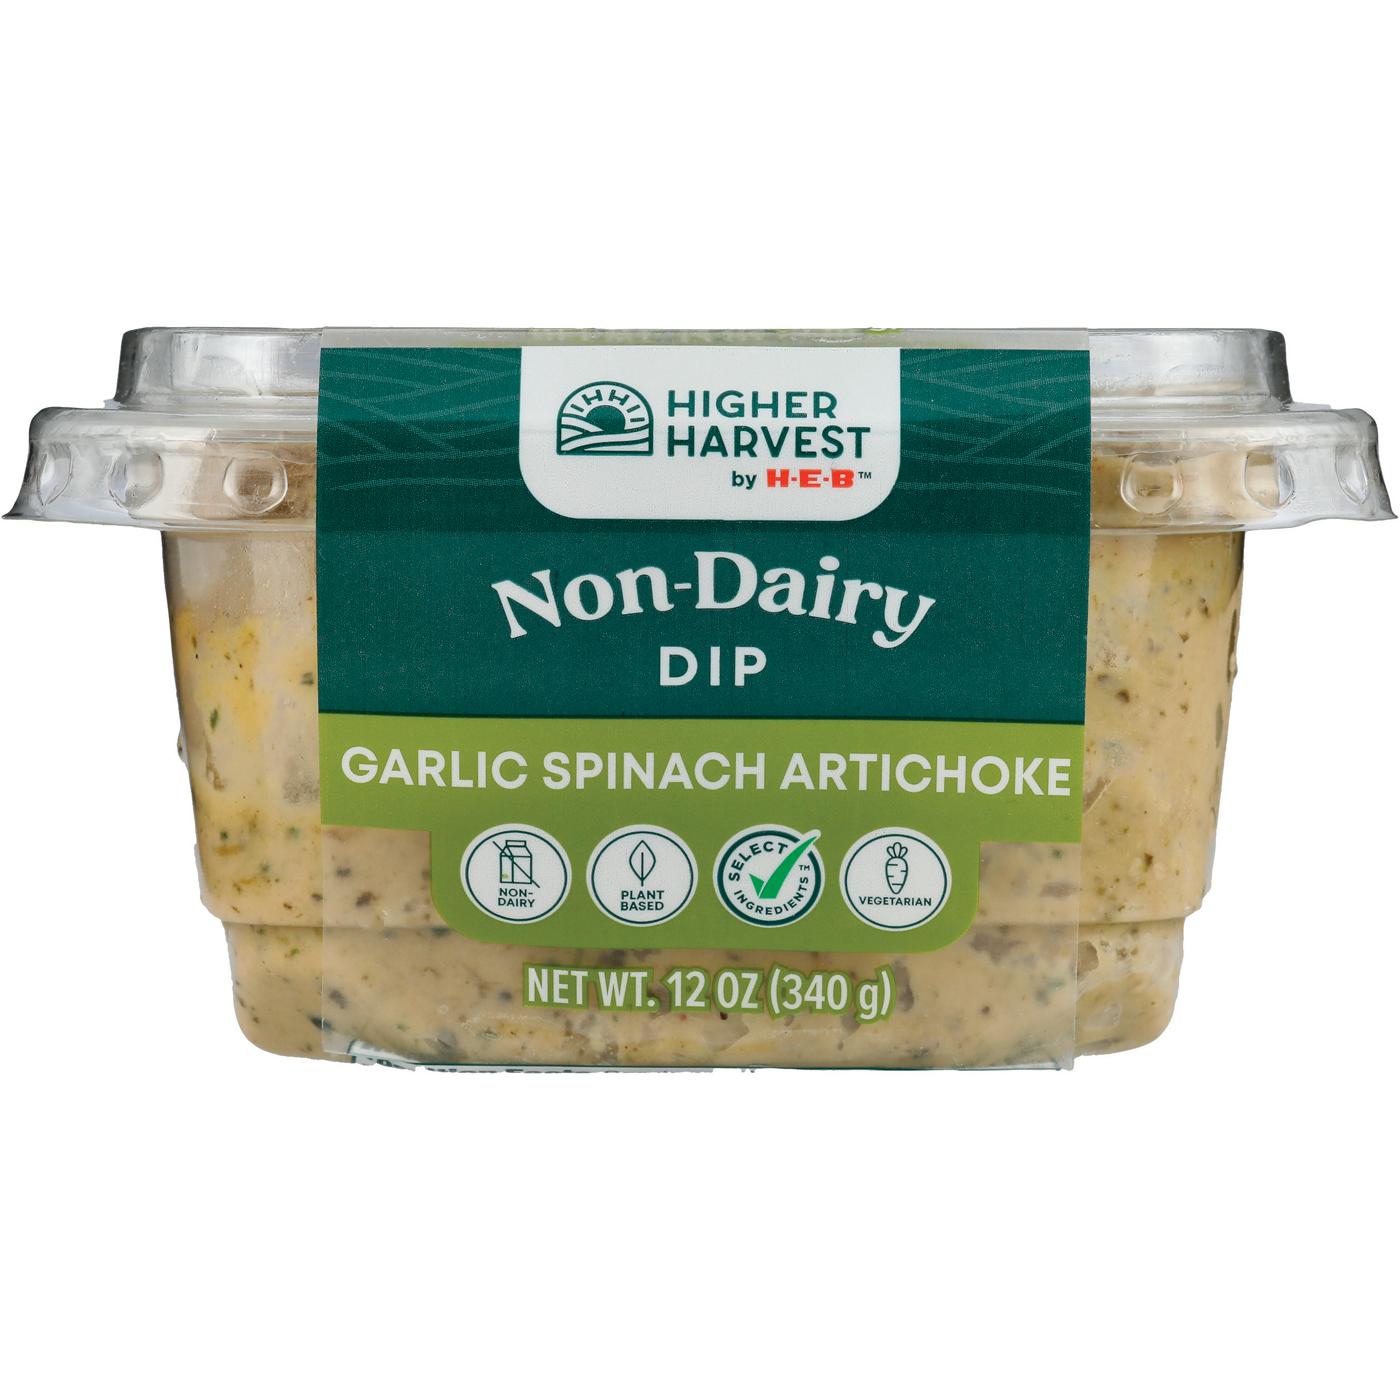 Higher Harvest by H-E-B Non-Dairy Dip – Garlic Spinach Artichoke; image 1 of 3